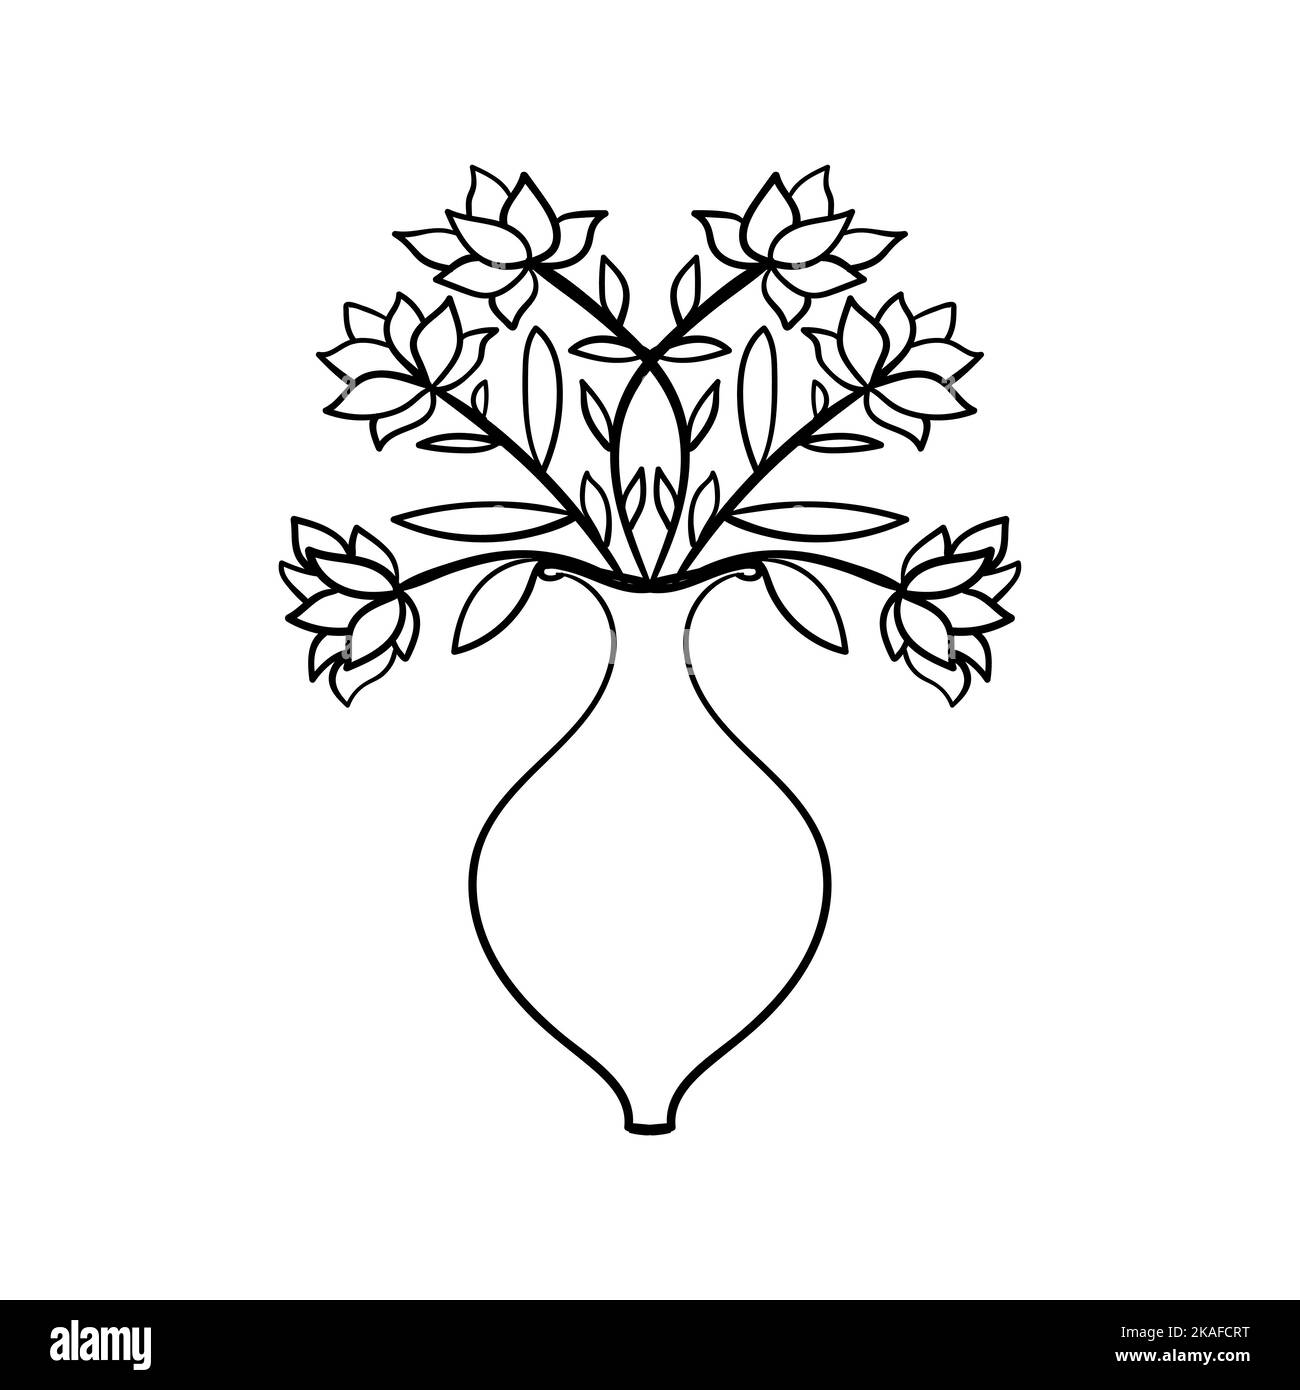 Floral bouquet on white background. Vector illustration. Coloring book element. Stock Vector